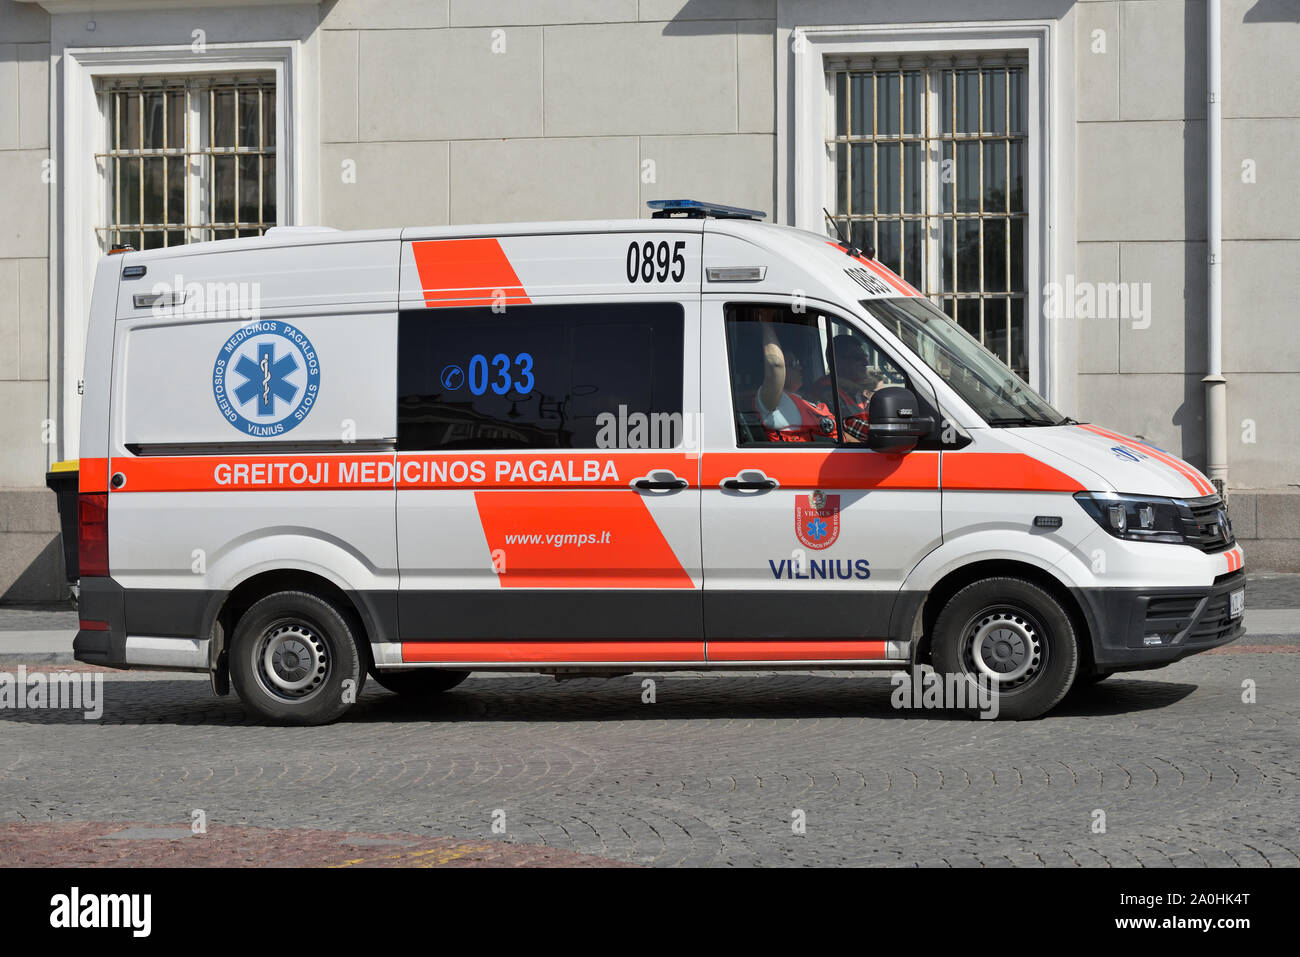 Vilnius, Lithuania - May 18: Ambulance car on street of Vilnius on May 18,  2019. Vilnius is the capital of Lithuania and its largest city Stock Photo  - Alamy